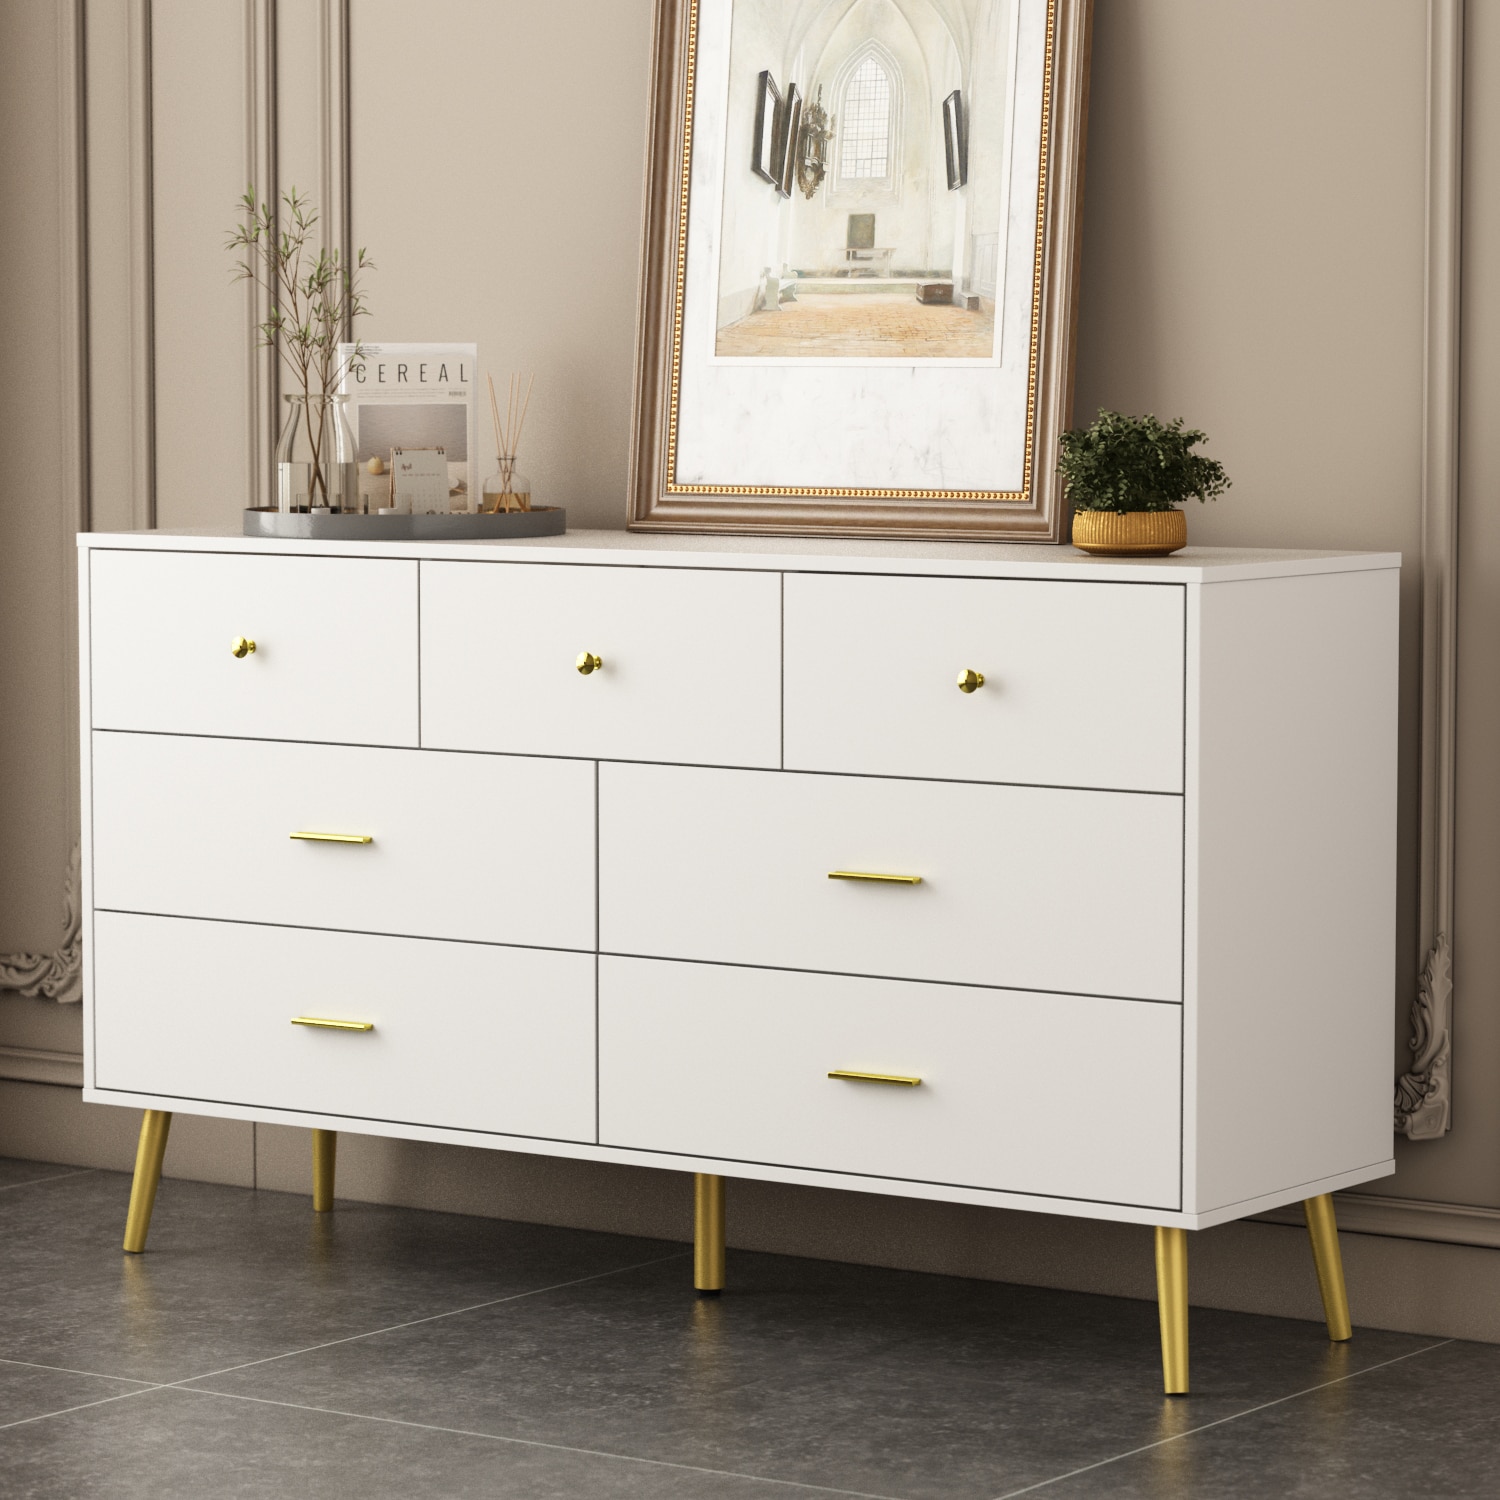 FUFU&GAGA Contemporary/Modern White Sideboard with 7 Drawers - Ample ...